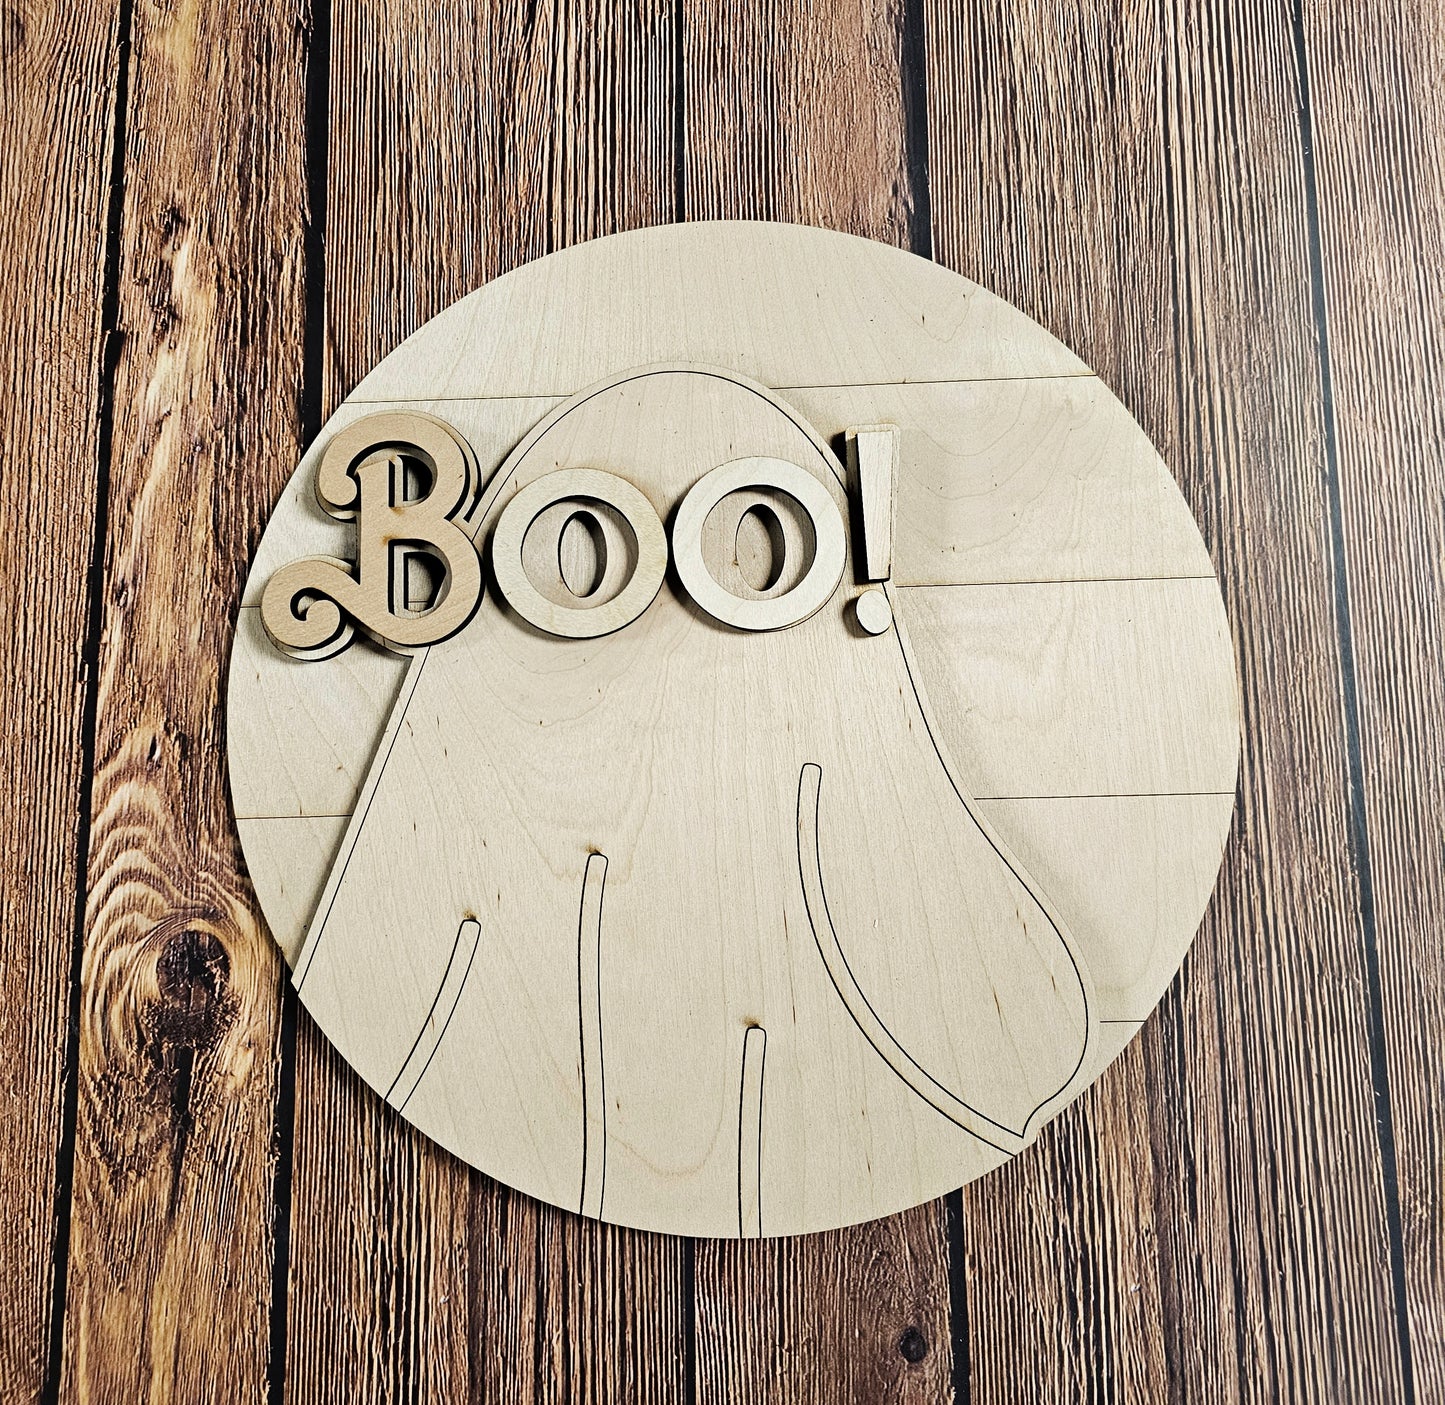 Boo Glasses Round Layers Sign Kit - Ready to Paint